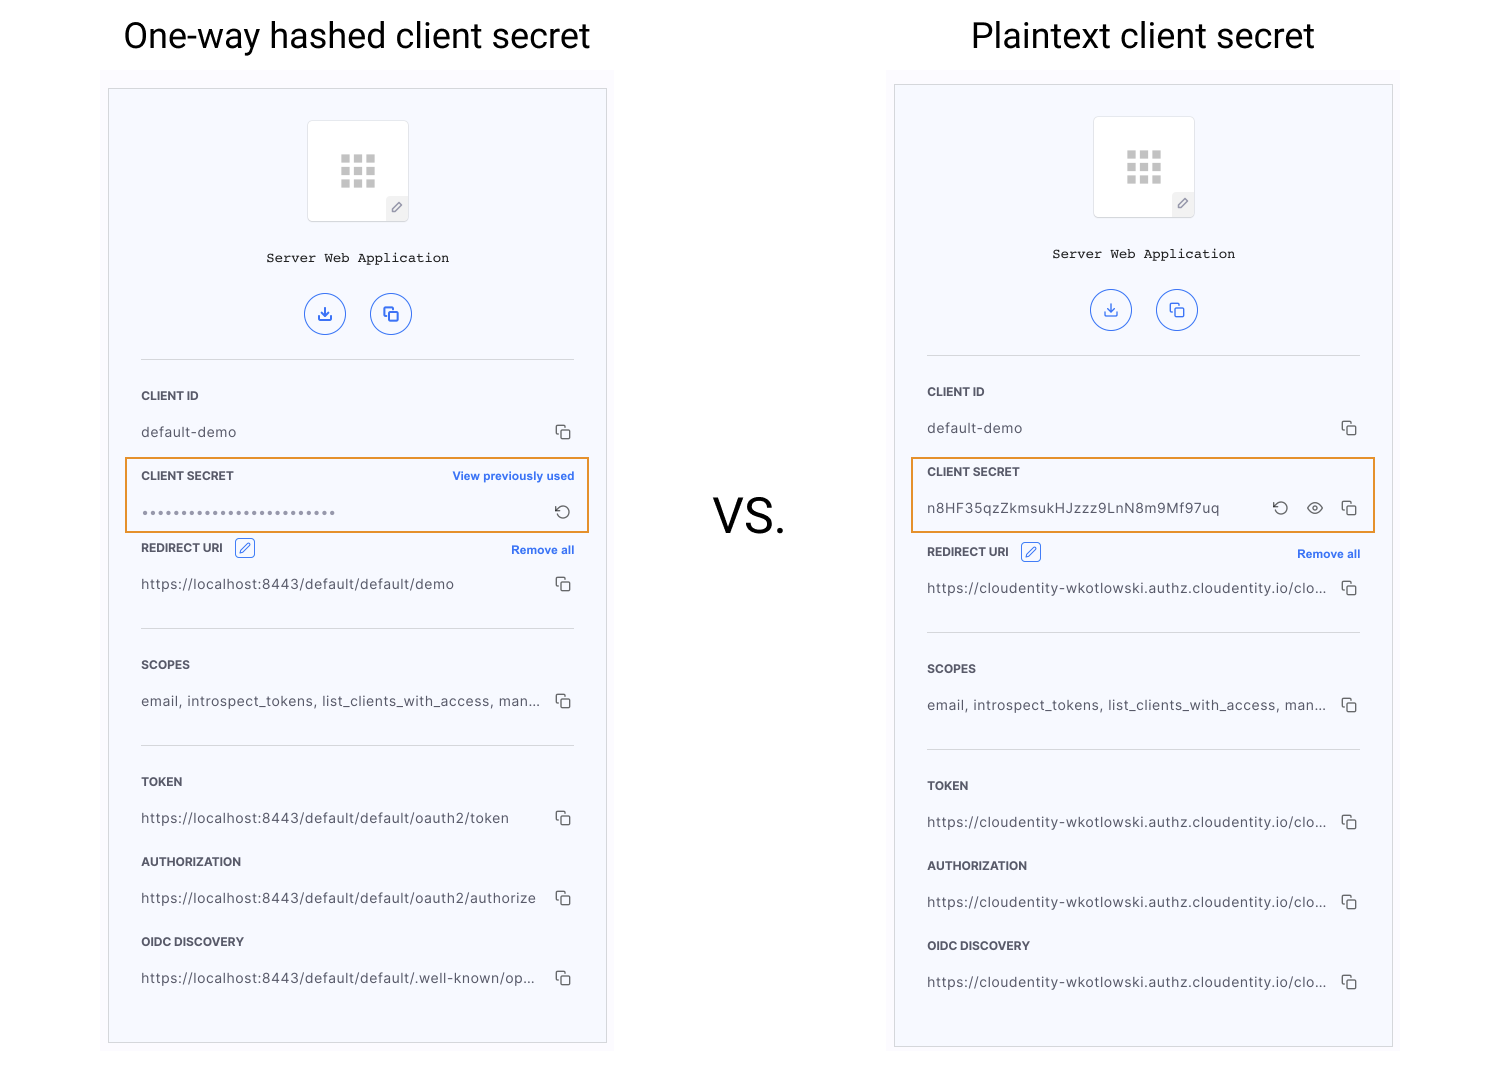 Difference between plaintext and hashed secrets